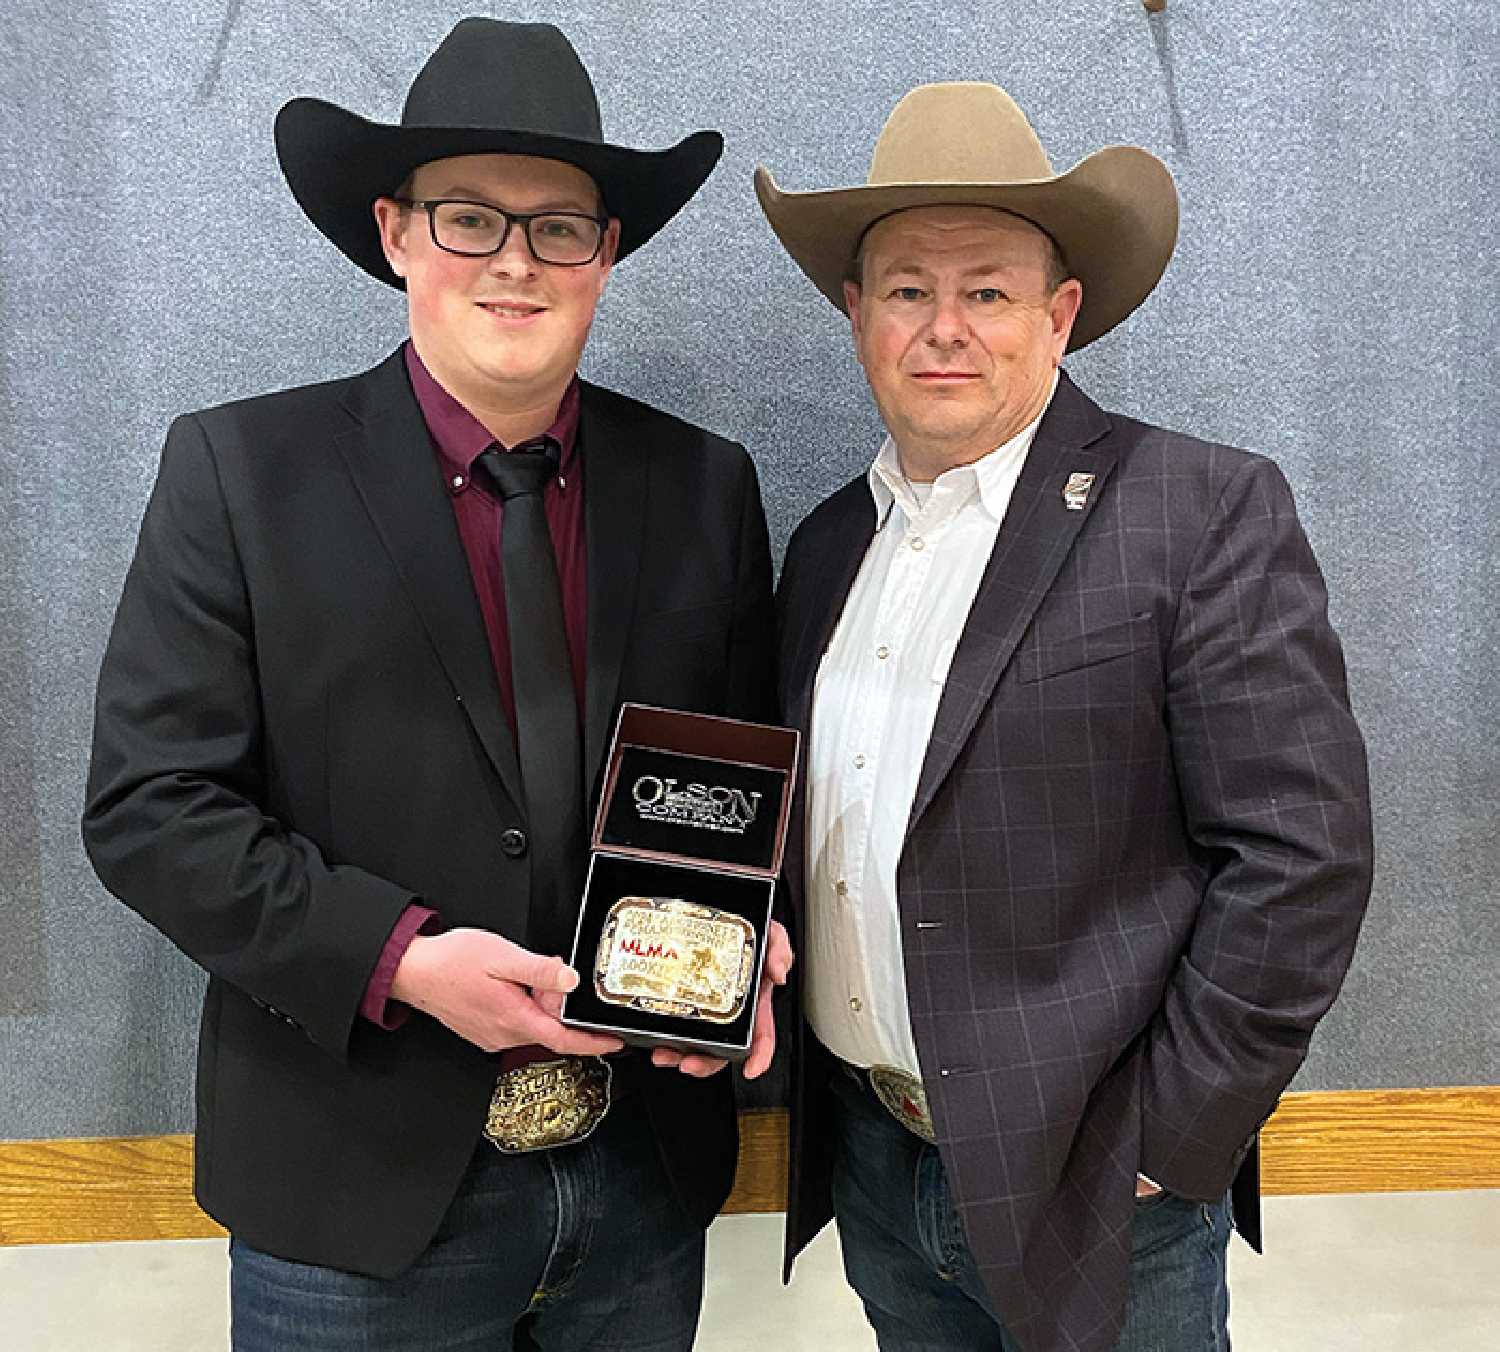 Ty Cutler with his father Ward Cutler at the Man-Sask Auctioneering Competition on March 22. Ty grew up watching his dad auctioneer, and won the Rookie Buckle at the competition.